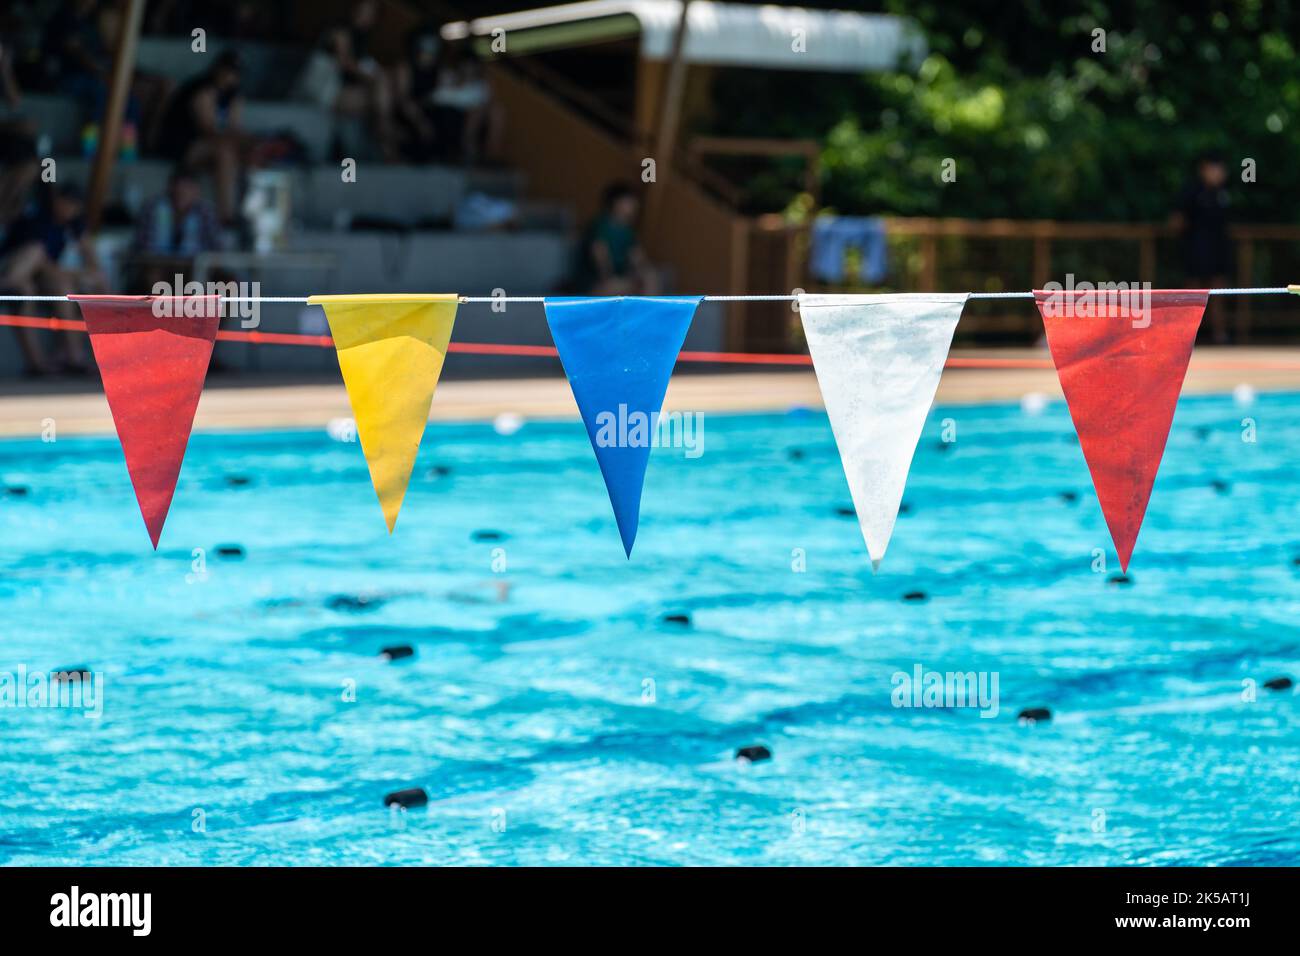 Multicolored triangle swim marker flags hanging above a swimming pool on a bright sunny day